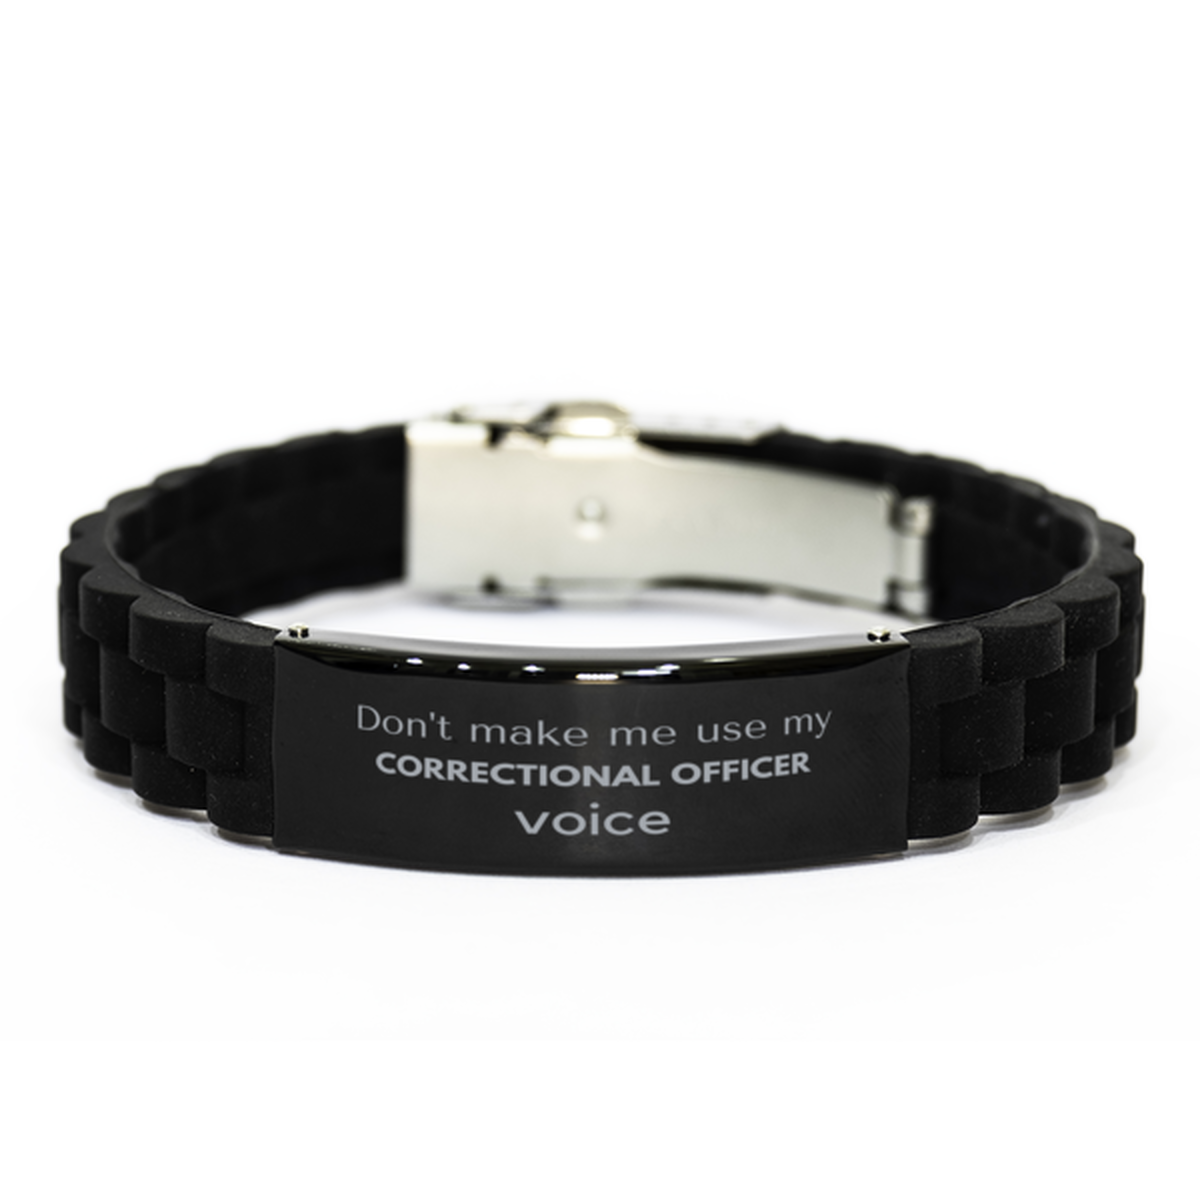 Don't make me use my Correctional Officer voice, Sarcasm Correctional Officer Gifts, Christmas Correctional Officer Black Glidelock Clasp Bracelet Birthday Unique Gifts For Correctional Officer Coworkers, Men, Women, Colleague, Friends